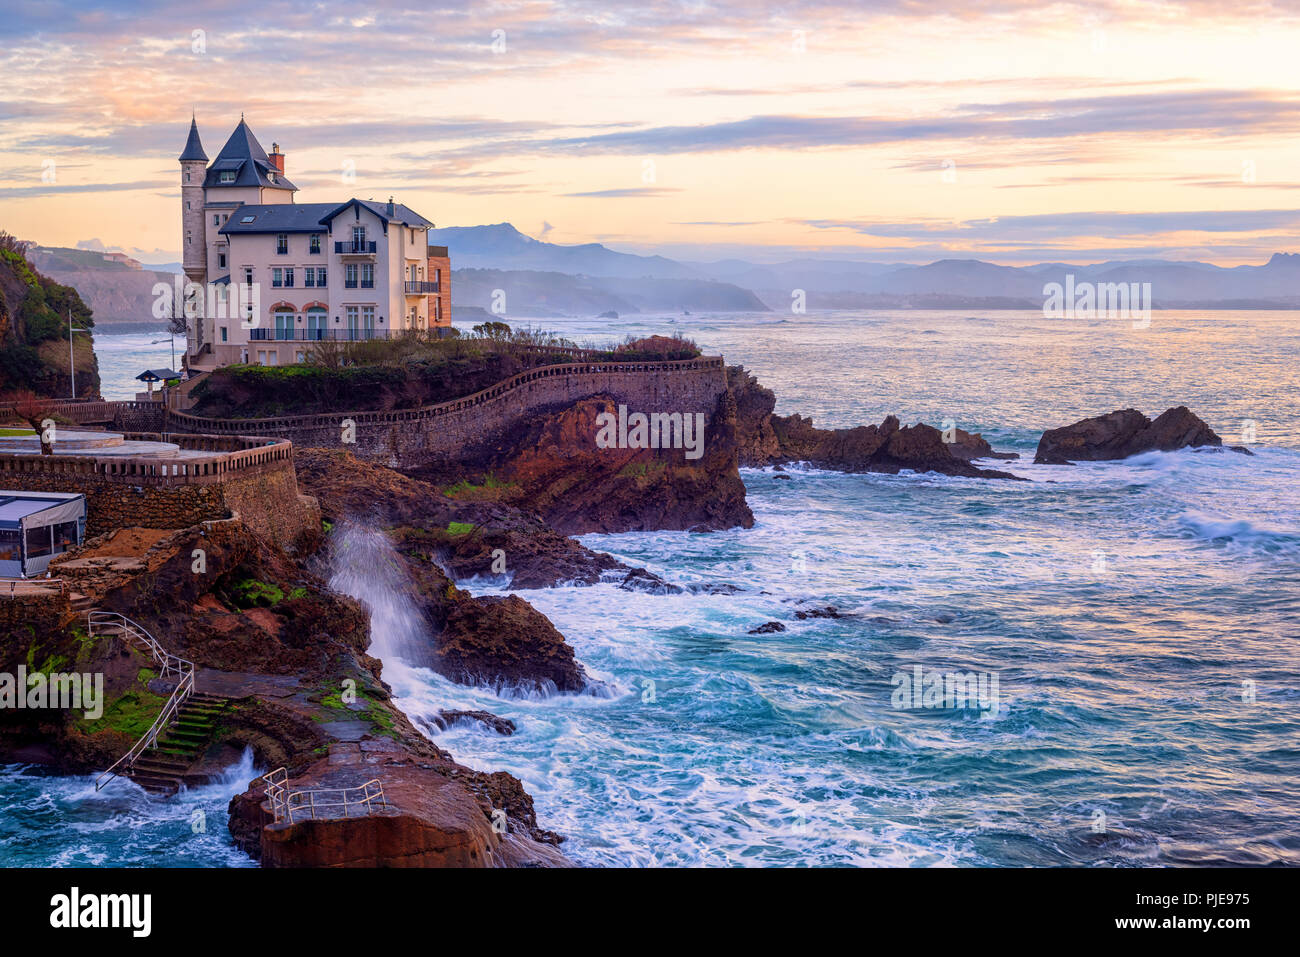 Biarritz, France, Bay of Biscay, the rocky Basque coast of Atlantic ocean in dramatic sunset light Stock Photo